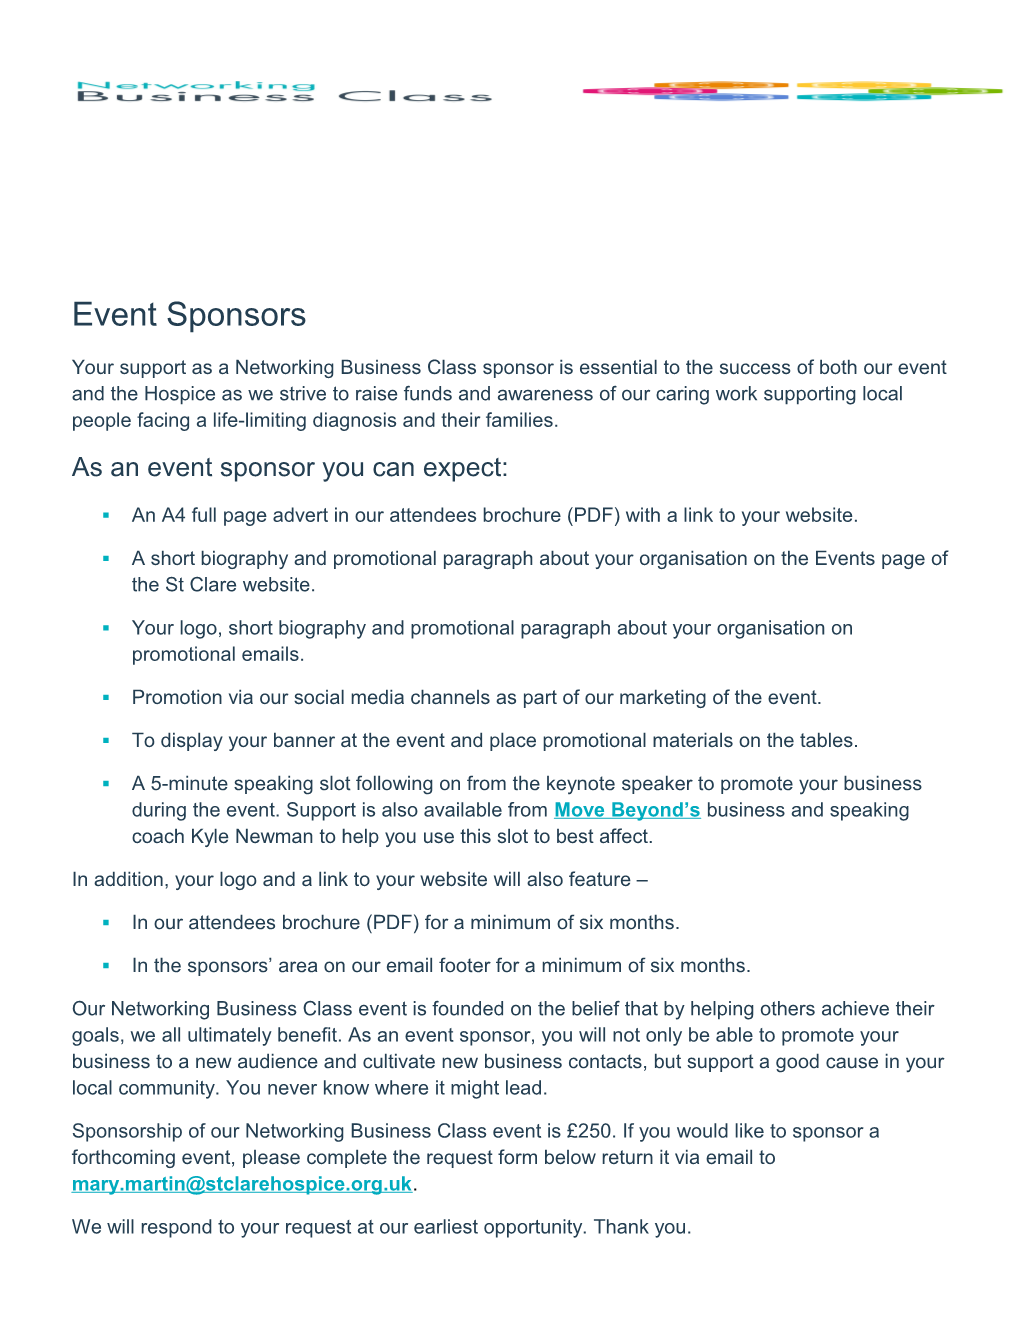 As an Event Sponsor You Can Expect